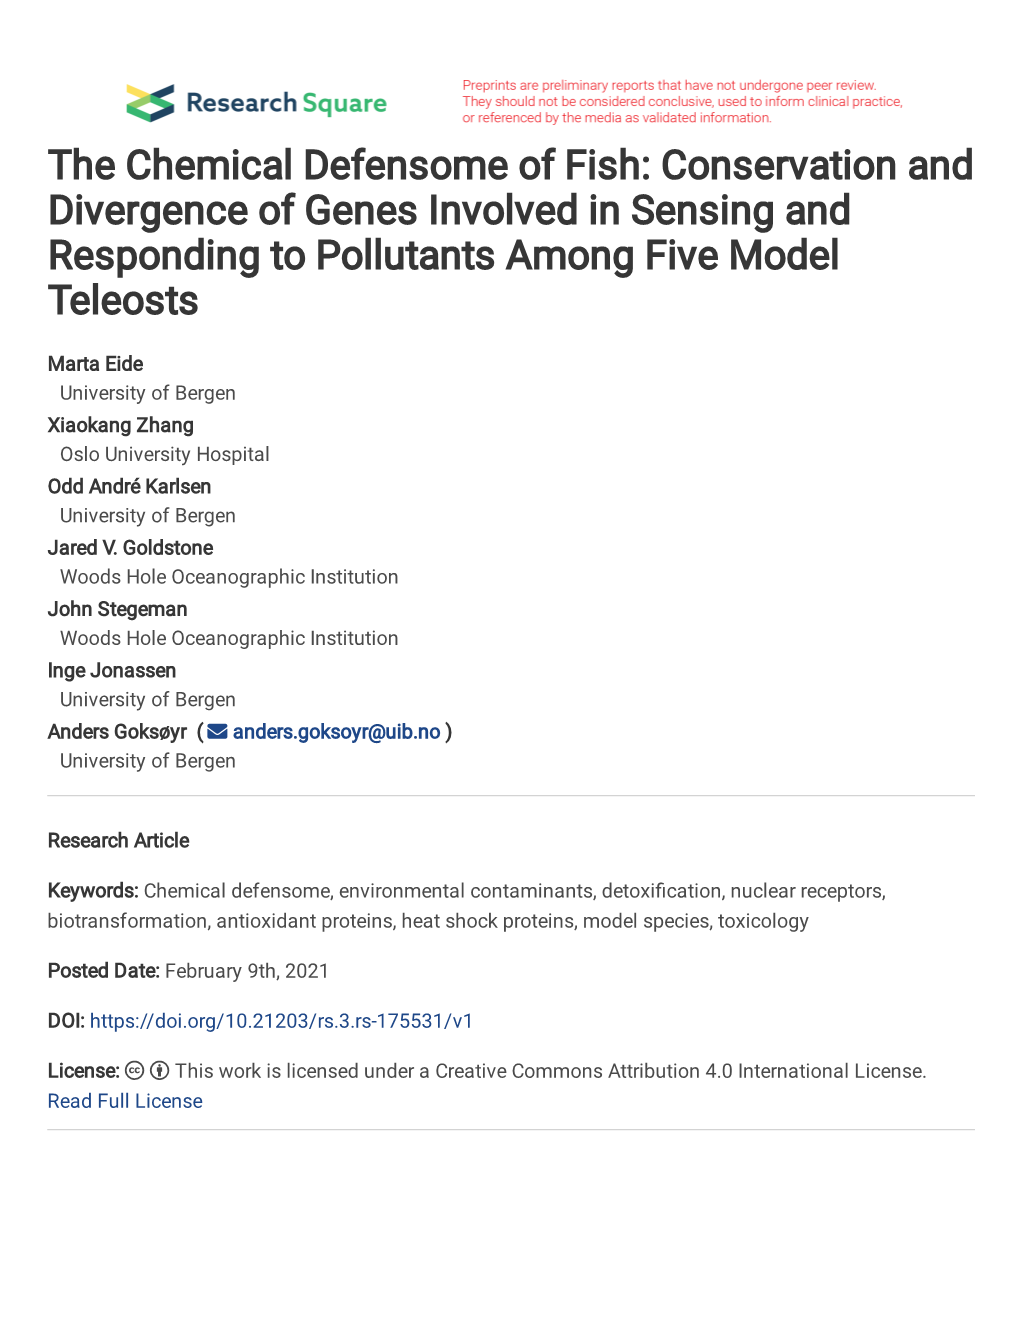 The Chemical Defensome of Fish: Conservation and Divergence of Genes Involved in Sensing and Responding to Pollutants Among Five Model Teleosts